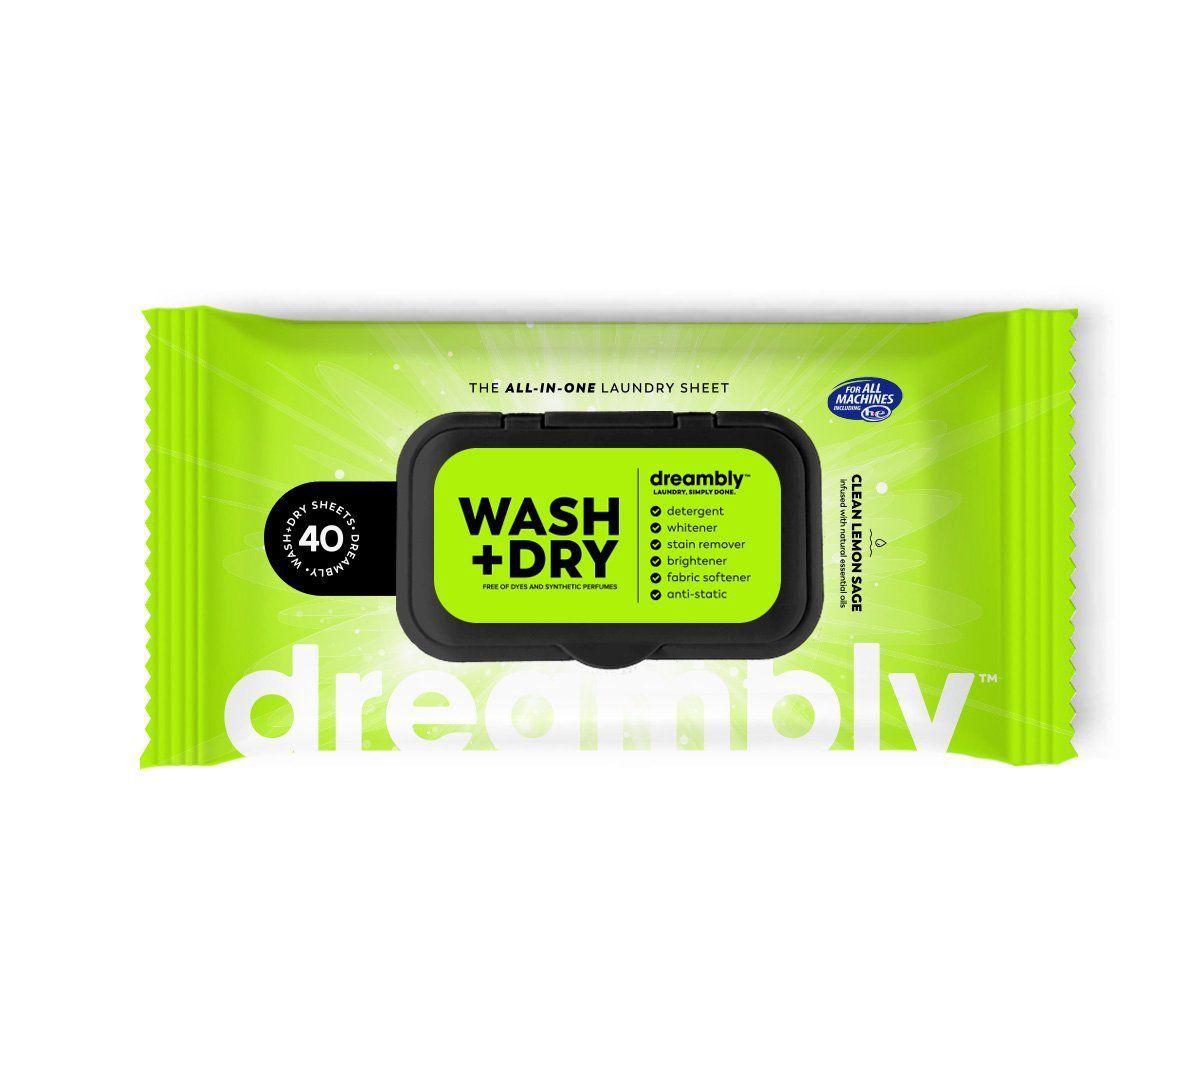 All-in-One Laundry Sheets (40 Pack)